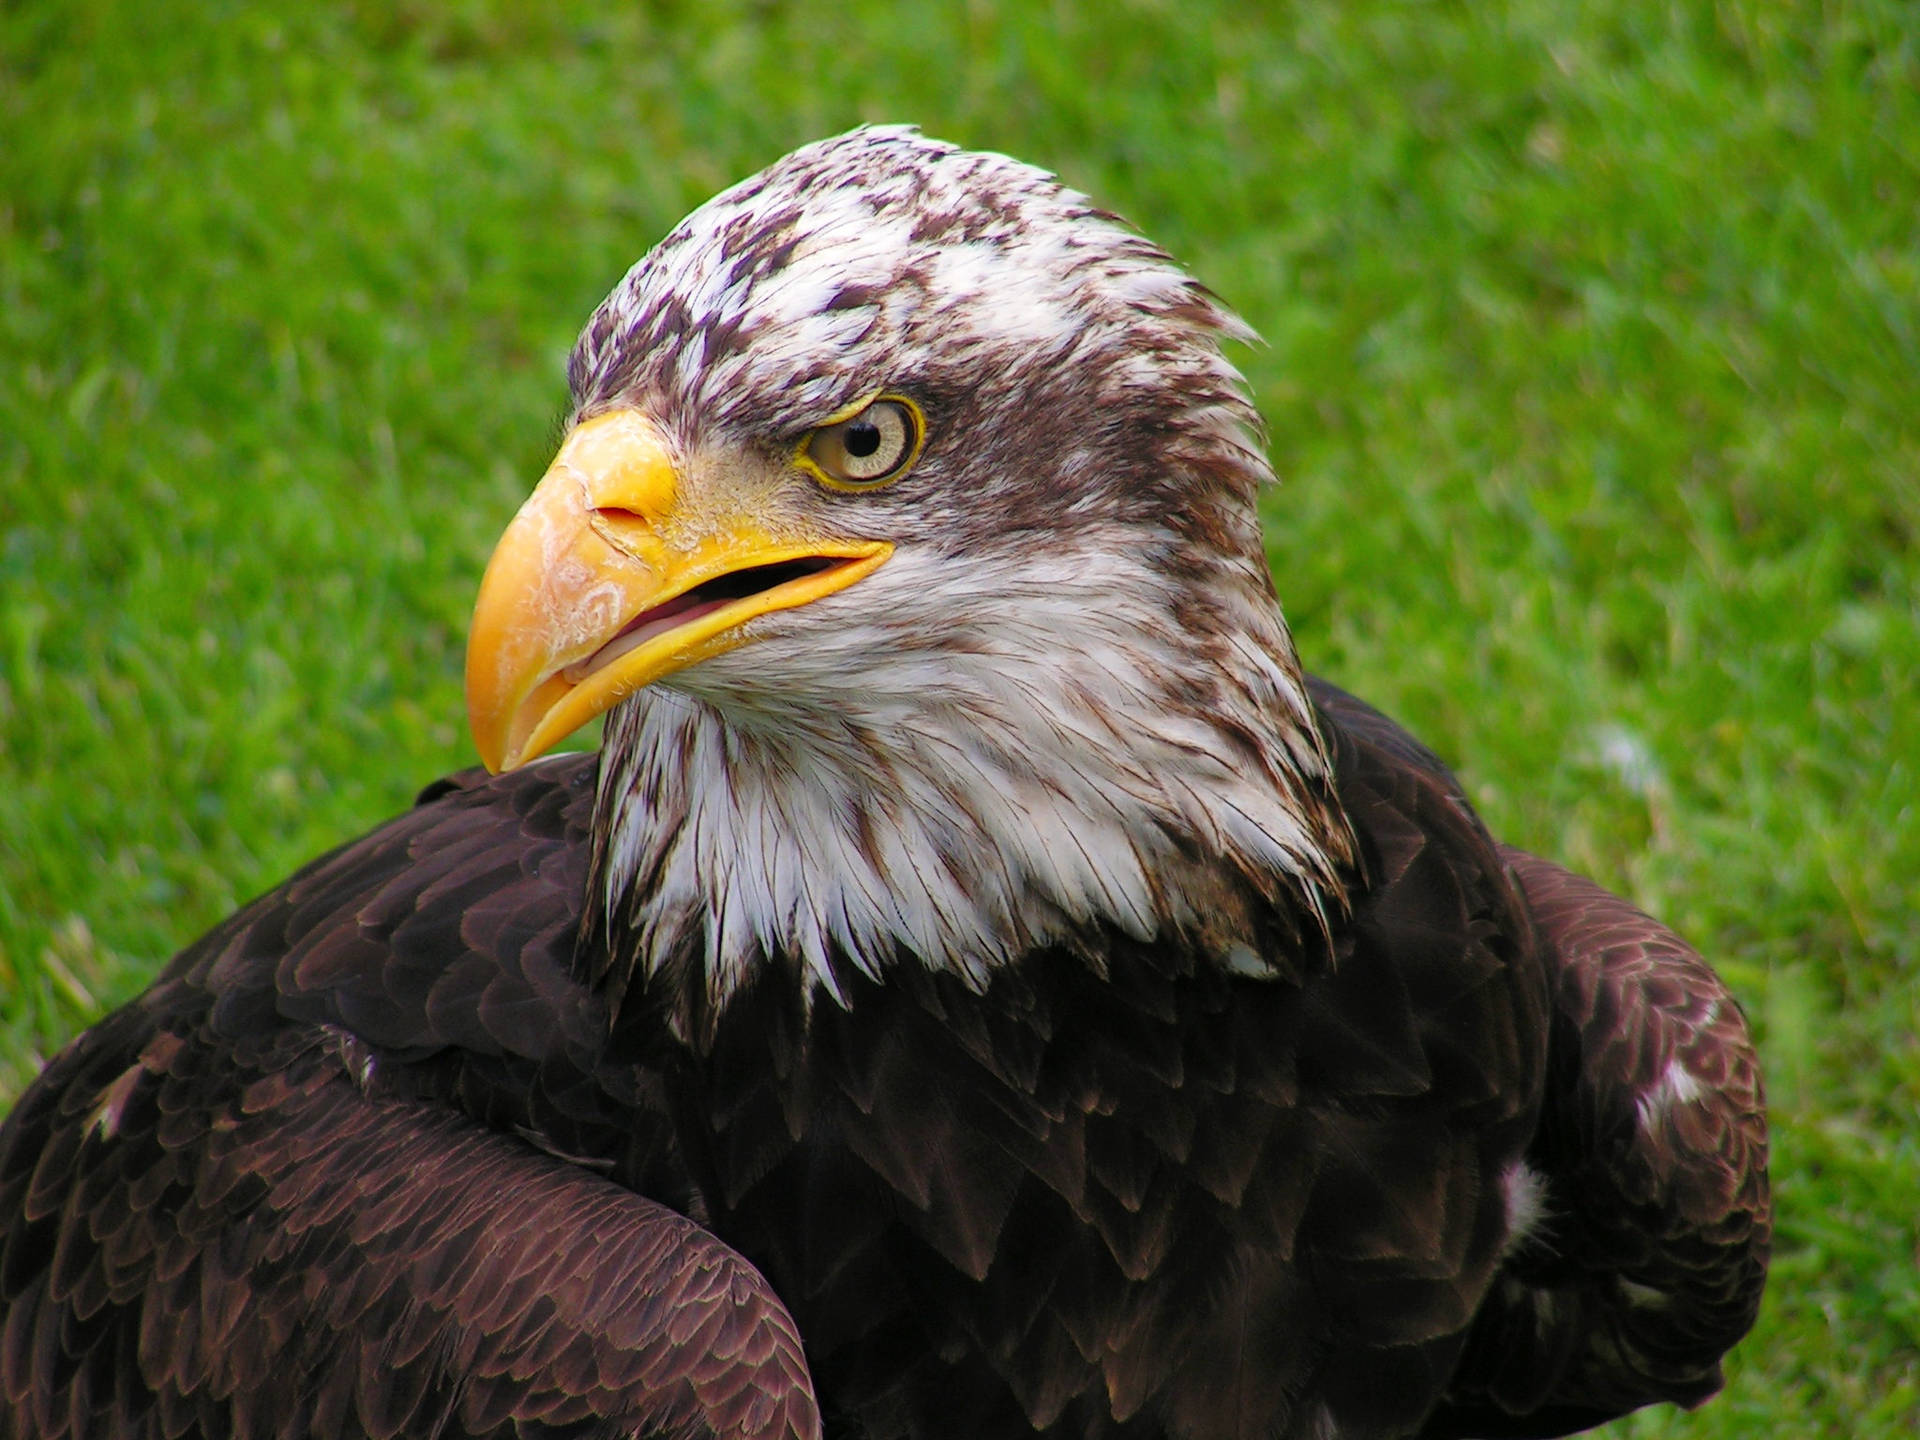 Eagle On The Green Grass Background